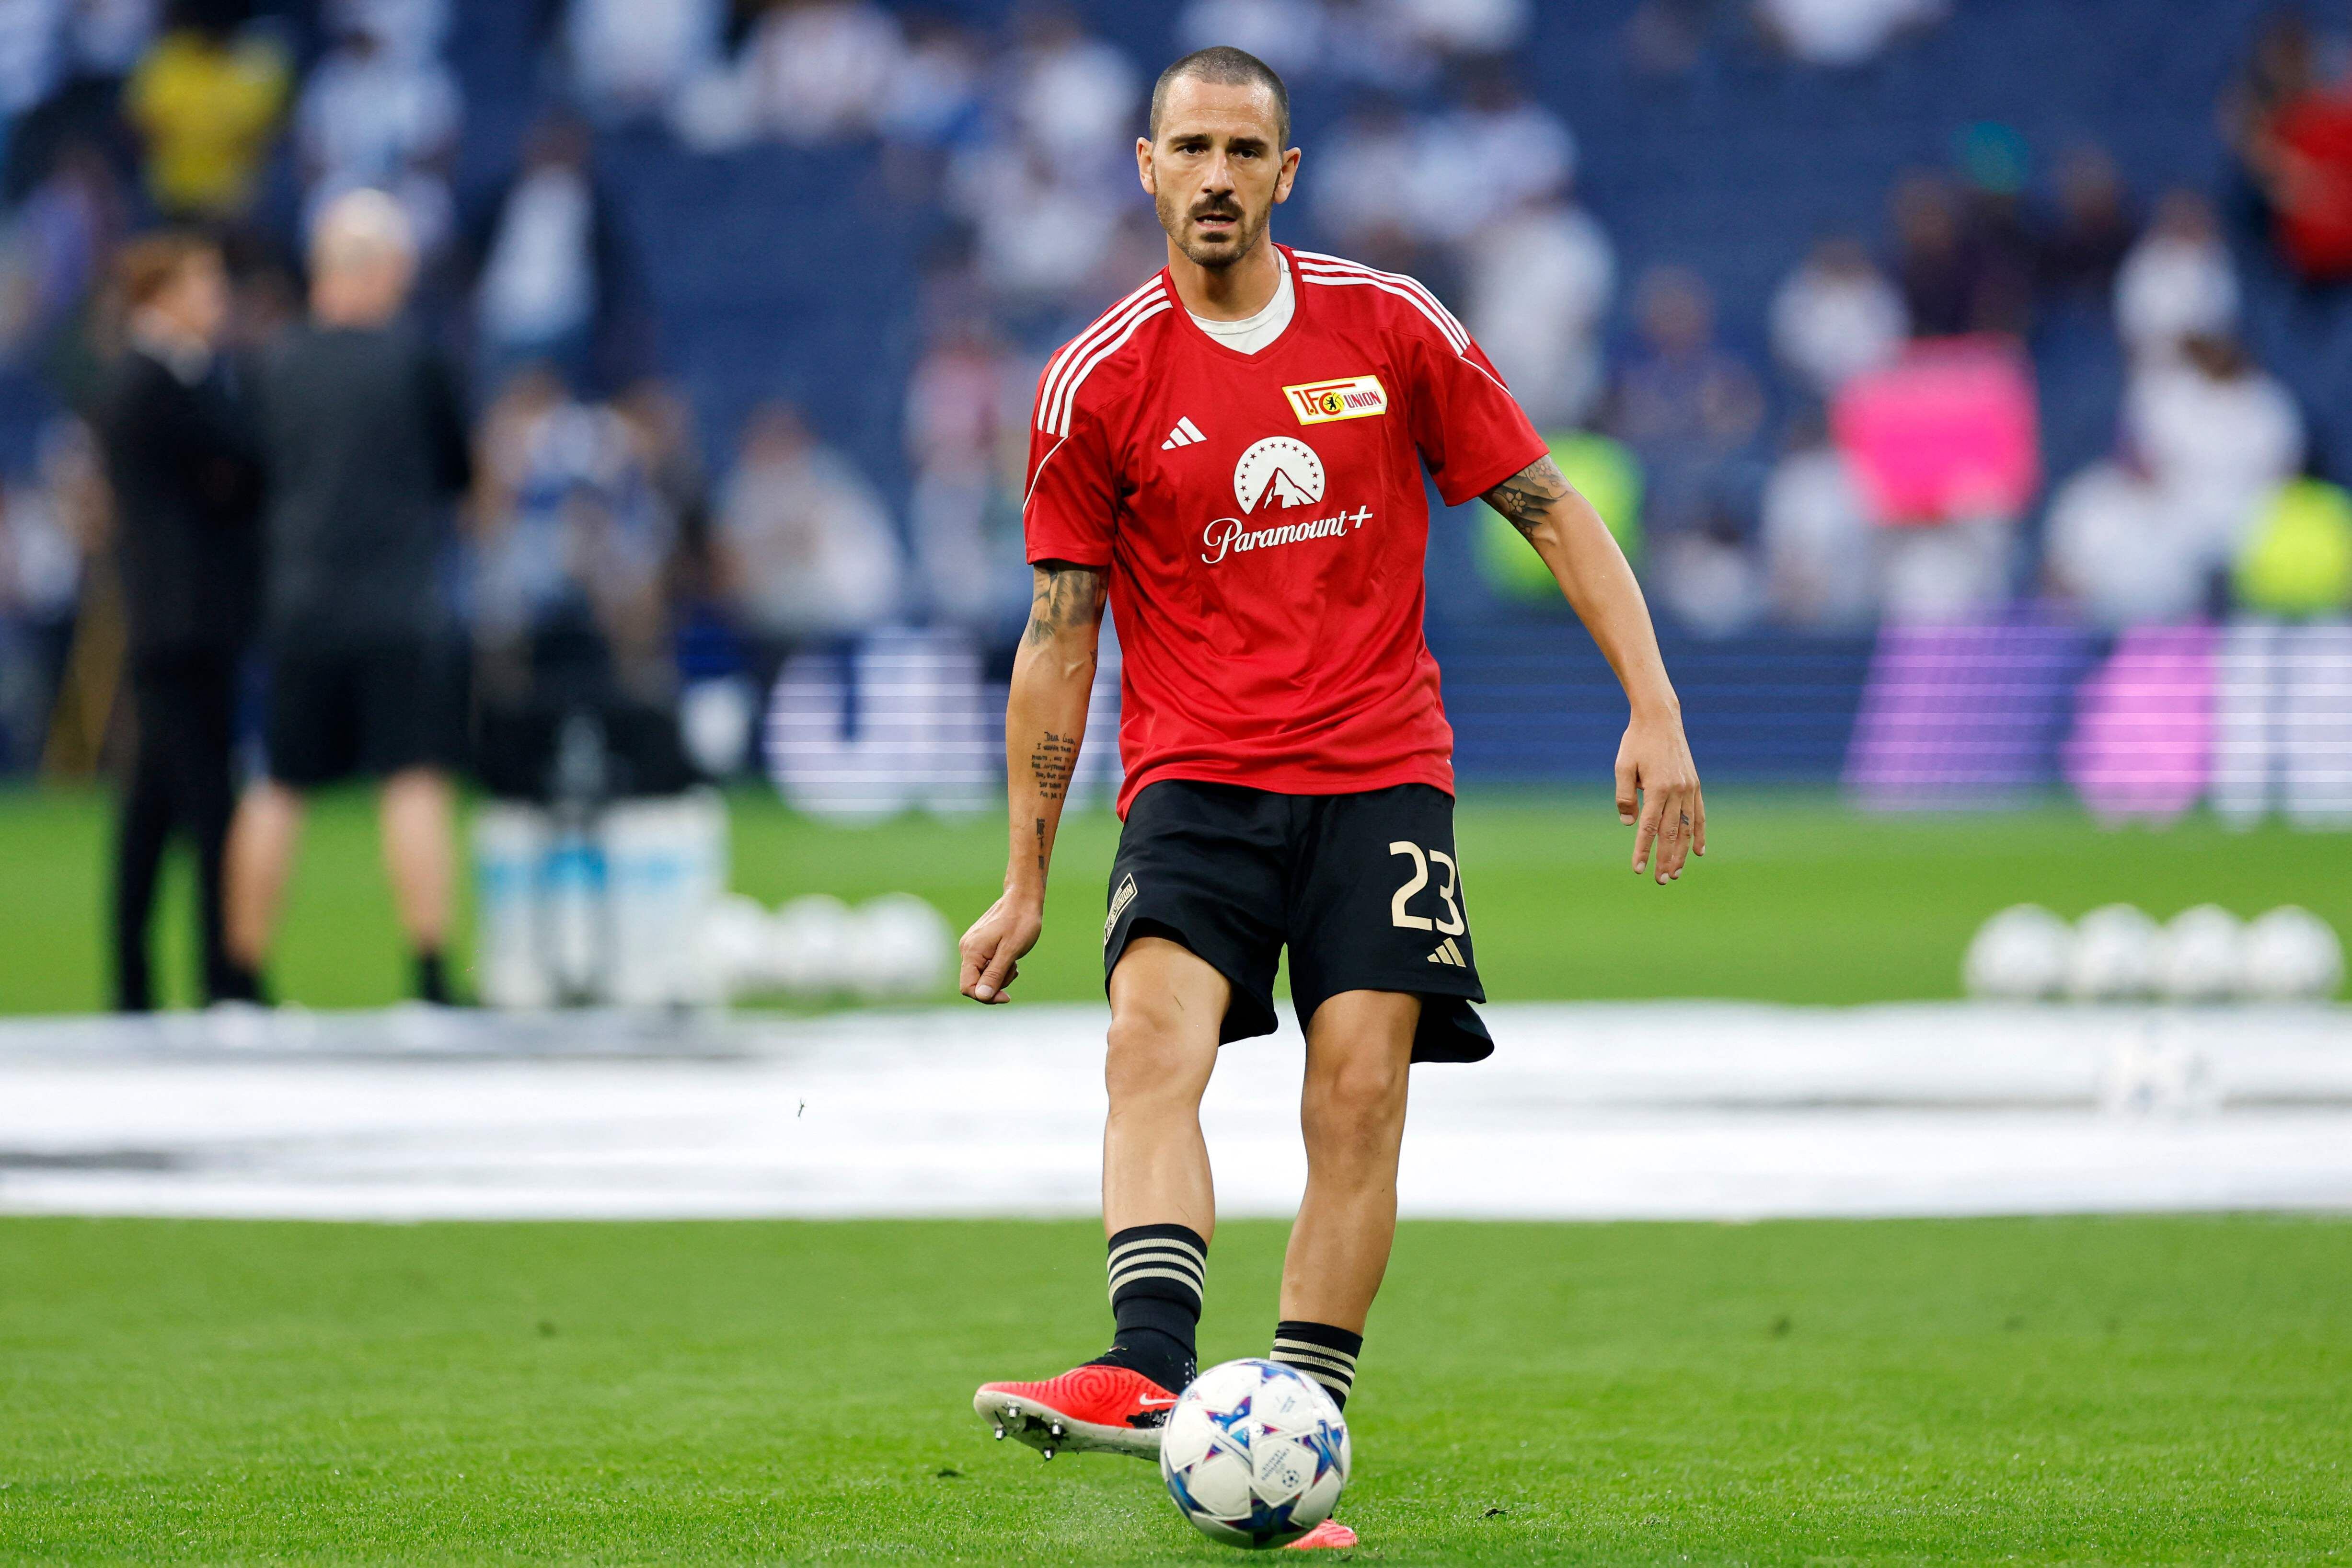 Union Berlin's Italian defender #23 Leonardo Bonucci warms up before the UEFA Champions League 1st round day 1 group C football match between Real Madrid and Union Berlin at the Santiago Bernabeu stadium in Madrid on September 20, 2023. (Photo by OSCAR DEL POZO / AFP)